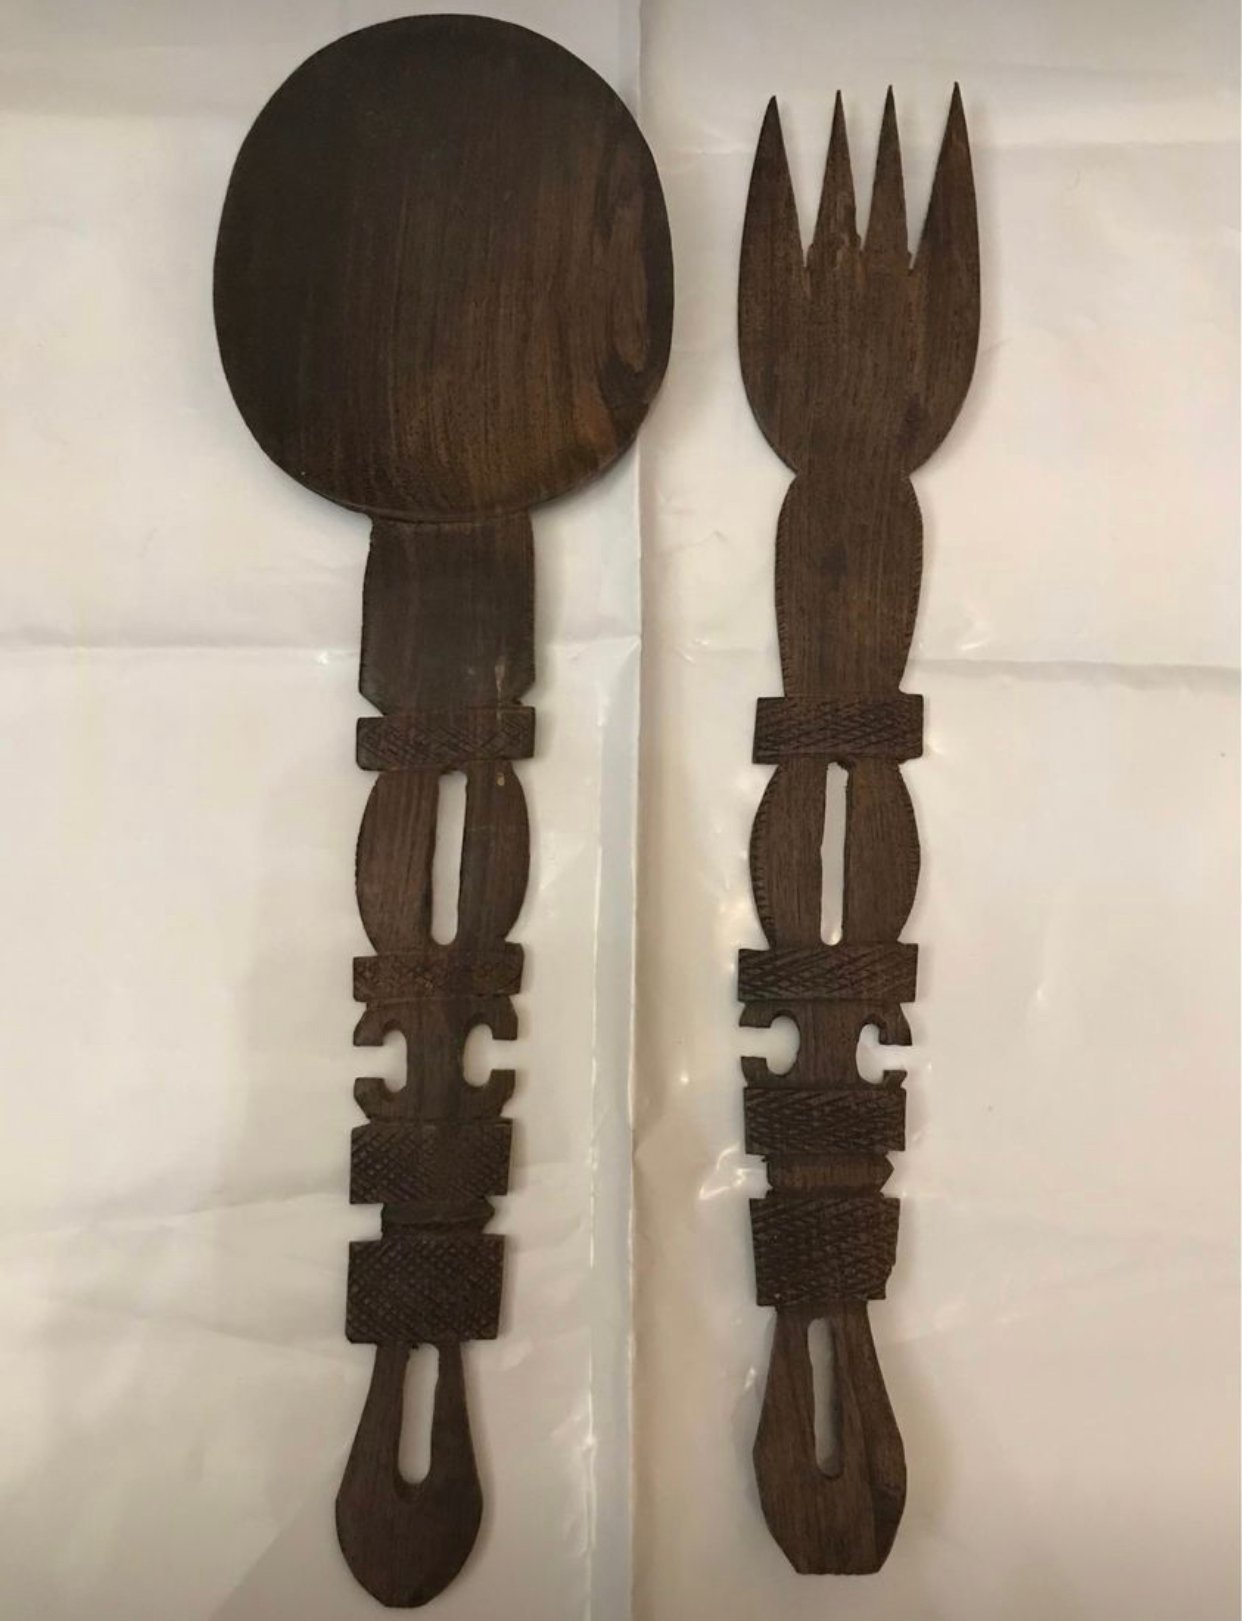 Vintage wooden large salad servers from South Africa